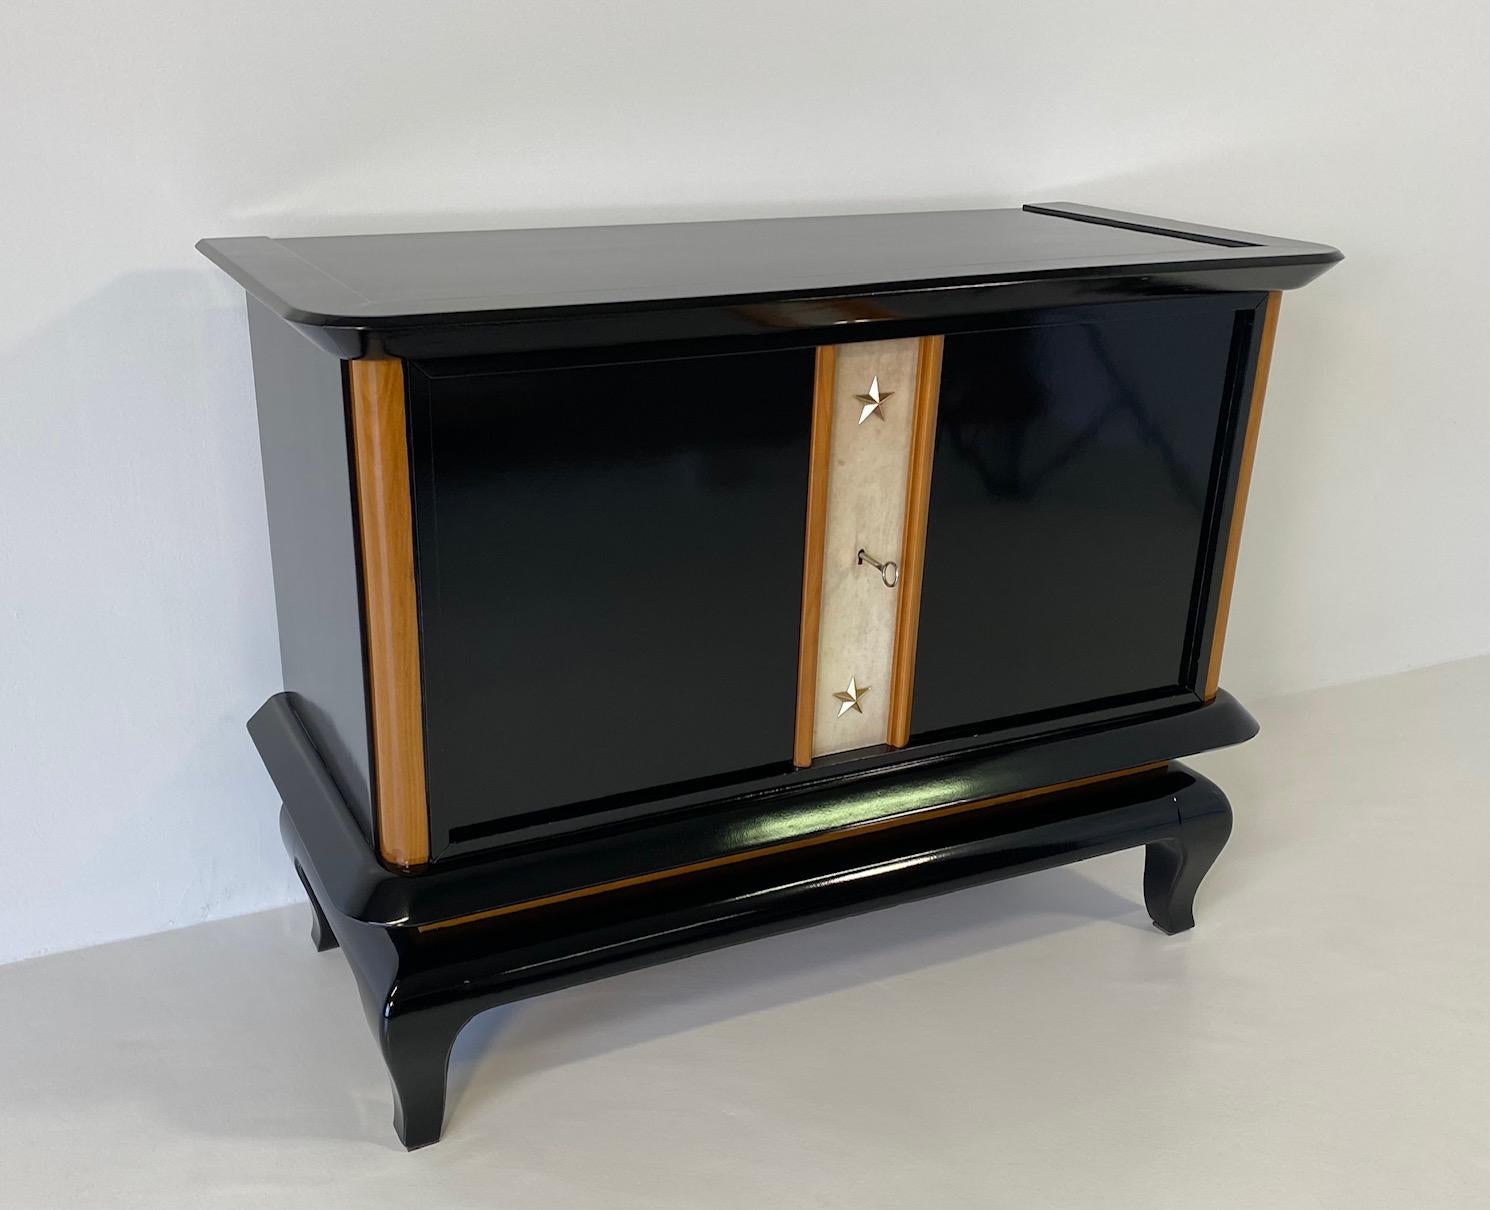 Brass French Art Deco Cabinet in Parchment, Maple and Black Lacquer, 1940s For Sale